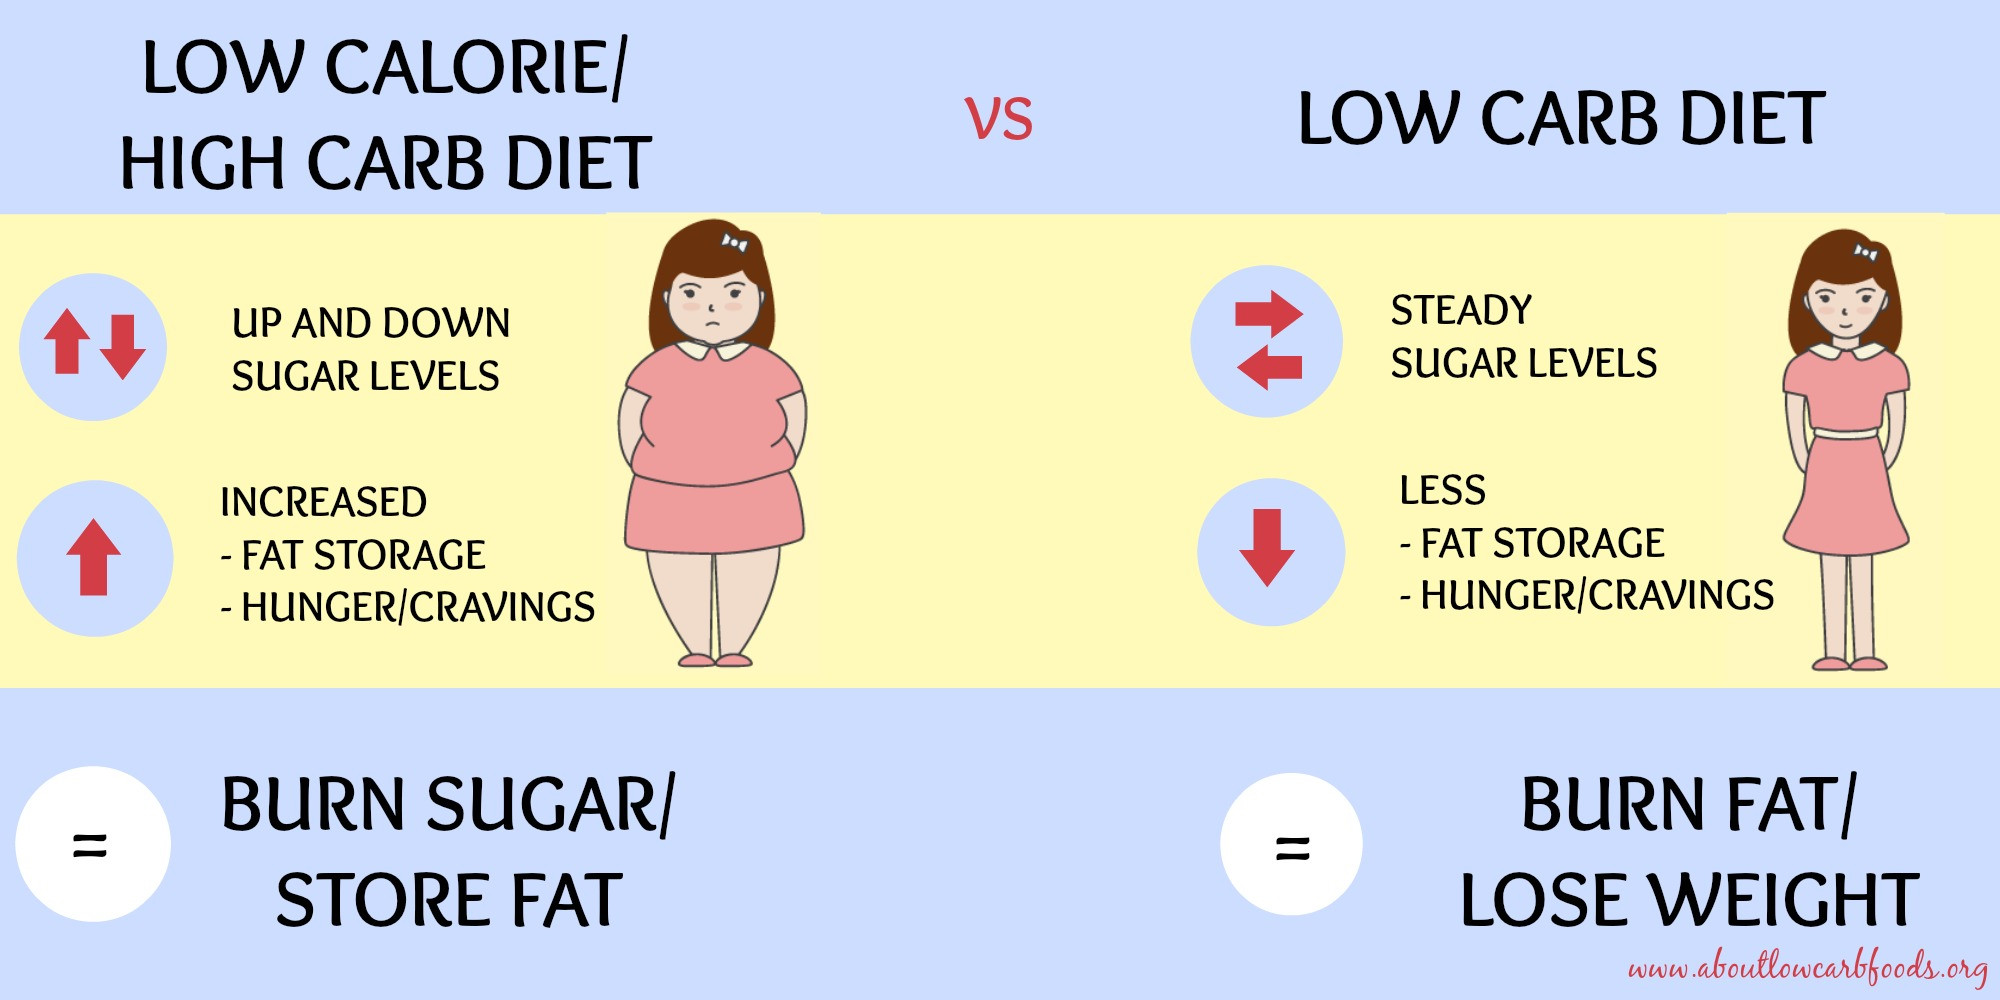 Low Fat Diet Losing Weight Clean Eating
 The Low Carb Way to Lose Weight and Feel Awesome About